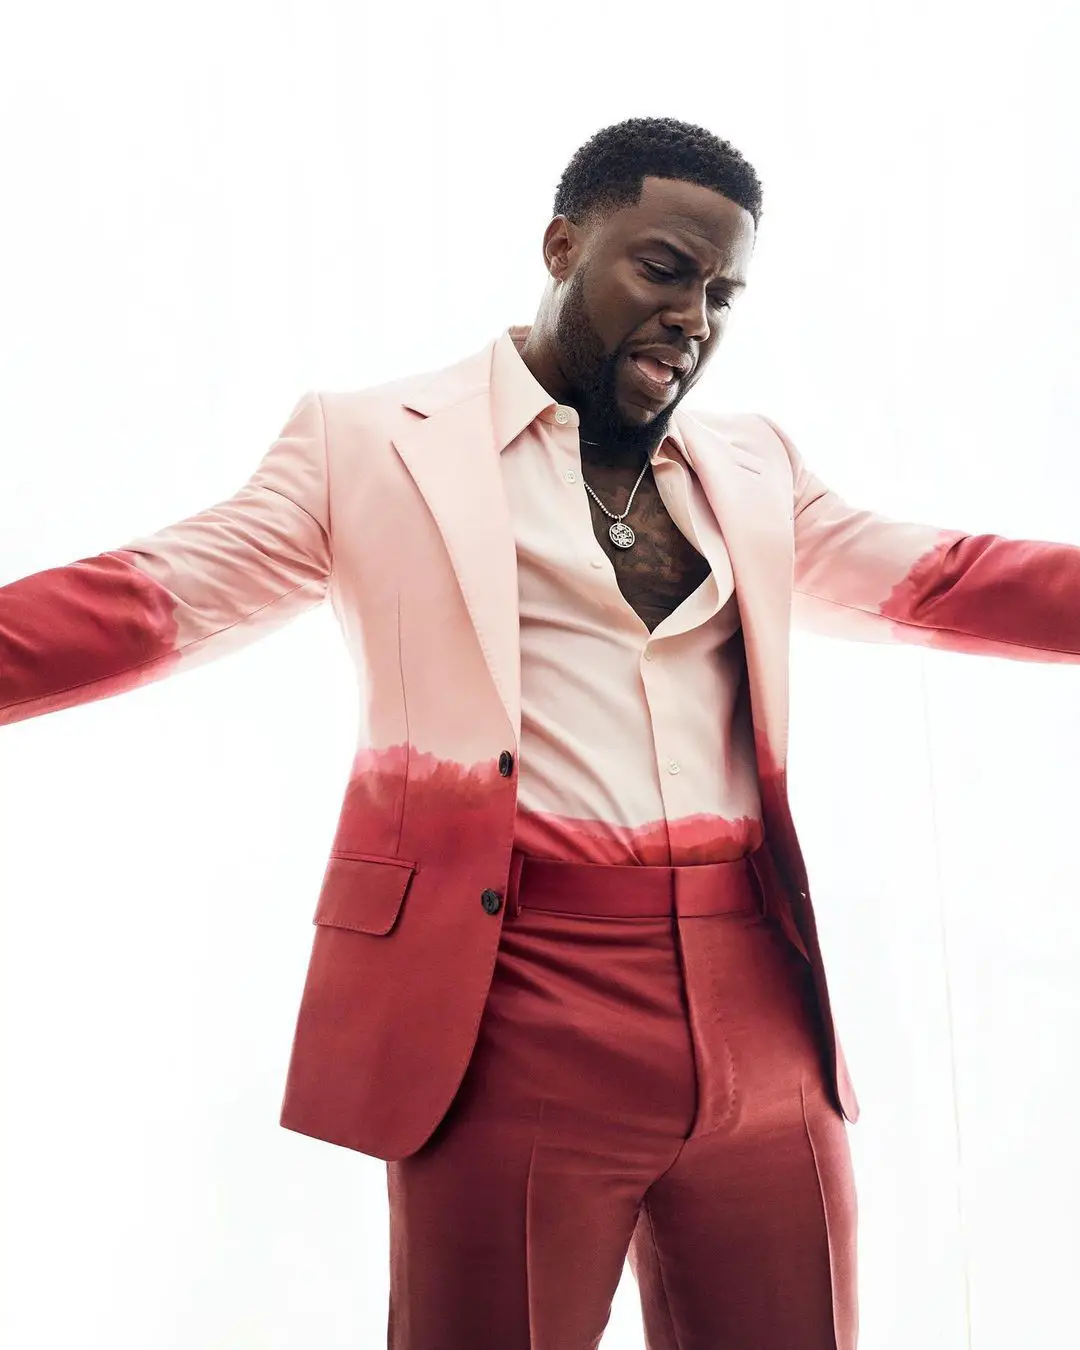 Kevin Hart In Four Suits That You'll Love!